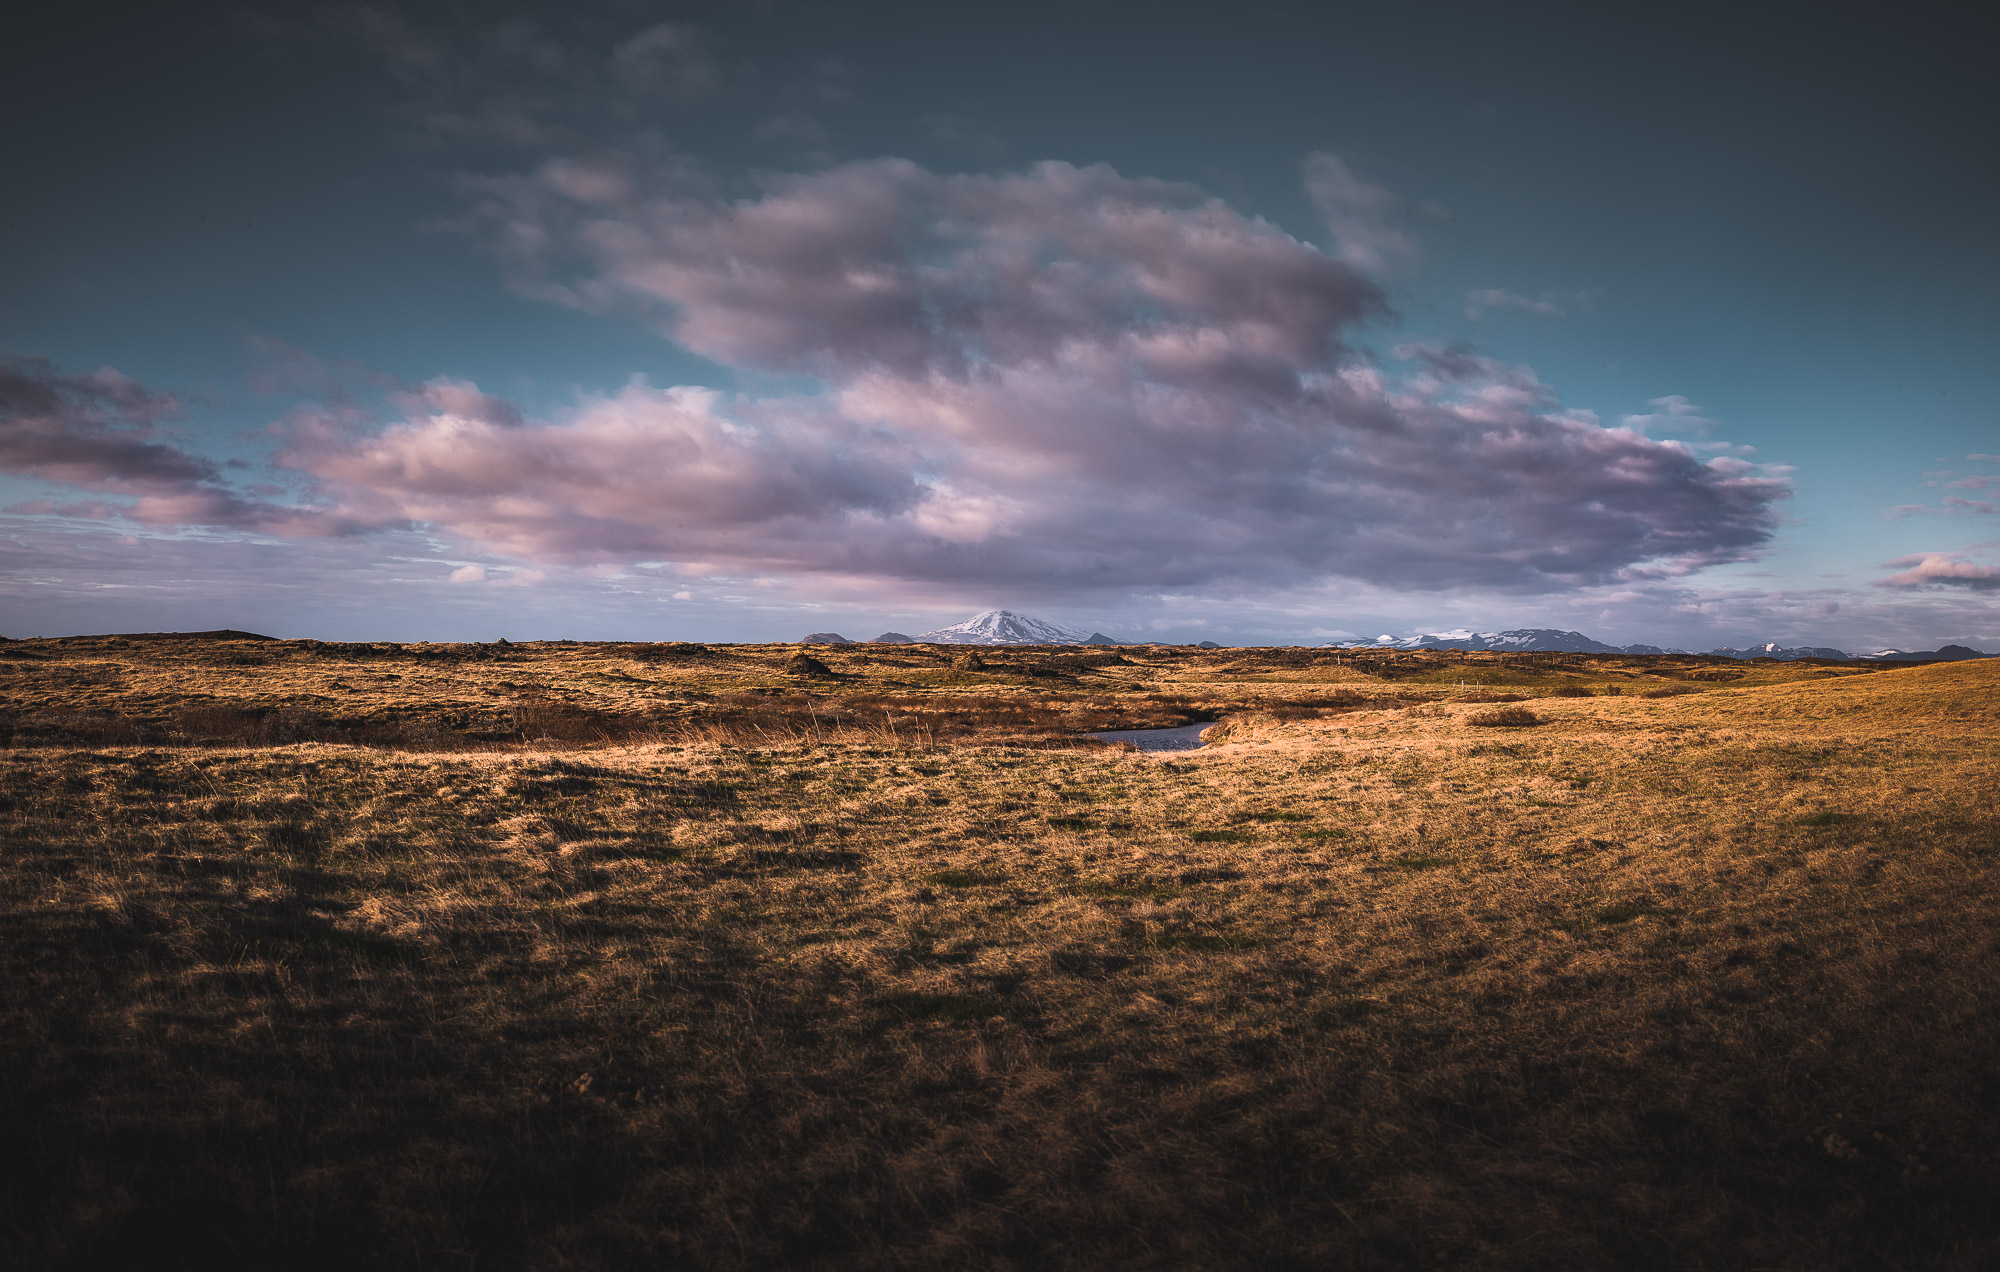 Distant Hekla, Iceland. 63 frame panorama, 177 megapixels, Sigma 105mm f/1.4 @ f/11, 1/100th, ISO 100